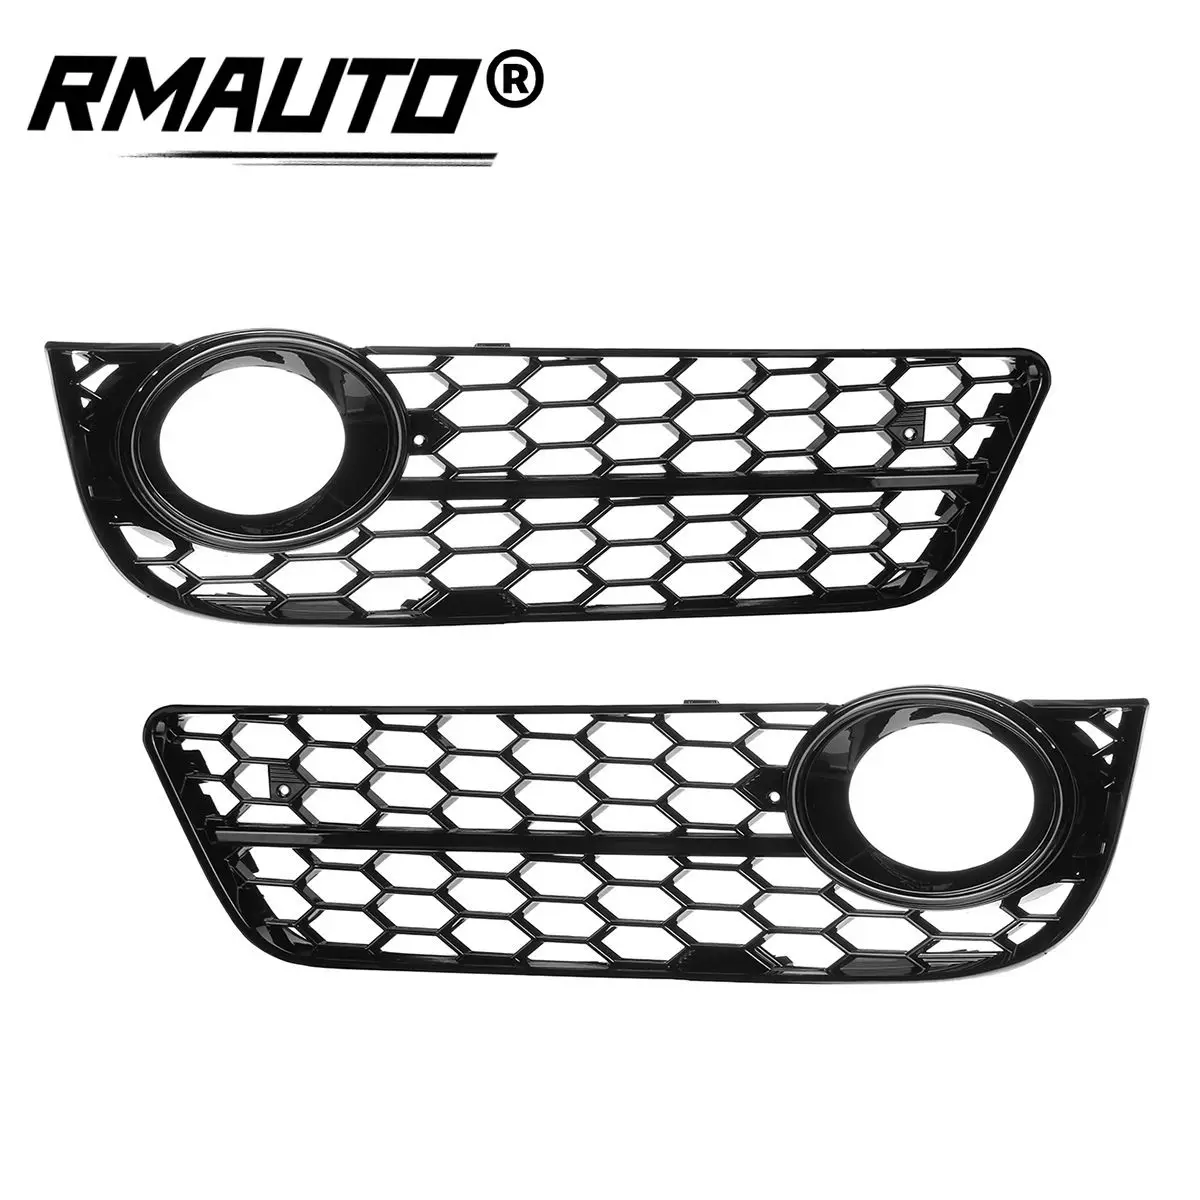 

2x A5 Car Front Bumper Fog Light Lamp Grille Grill Cover Mesh Honeycomb Hex For Audi A5 Coupe/Sportback 08-11 Cabriolet 10-11